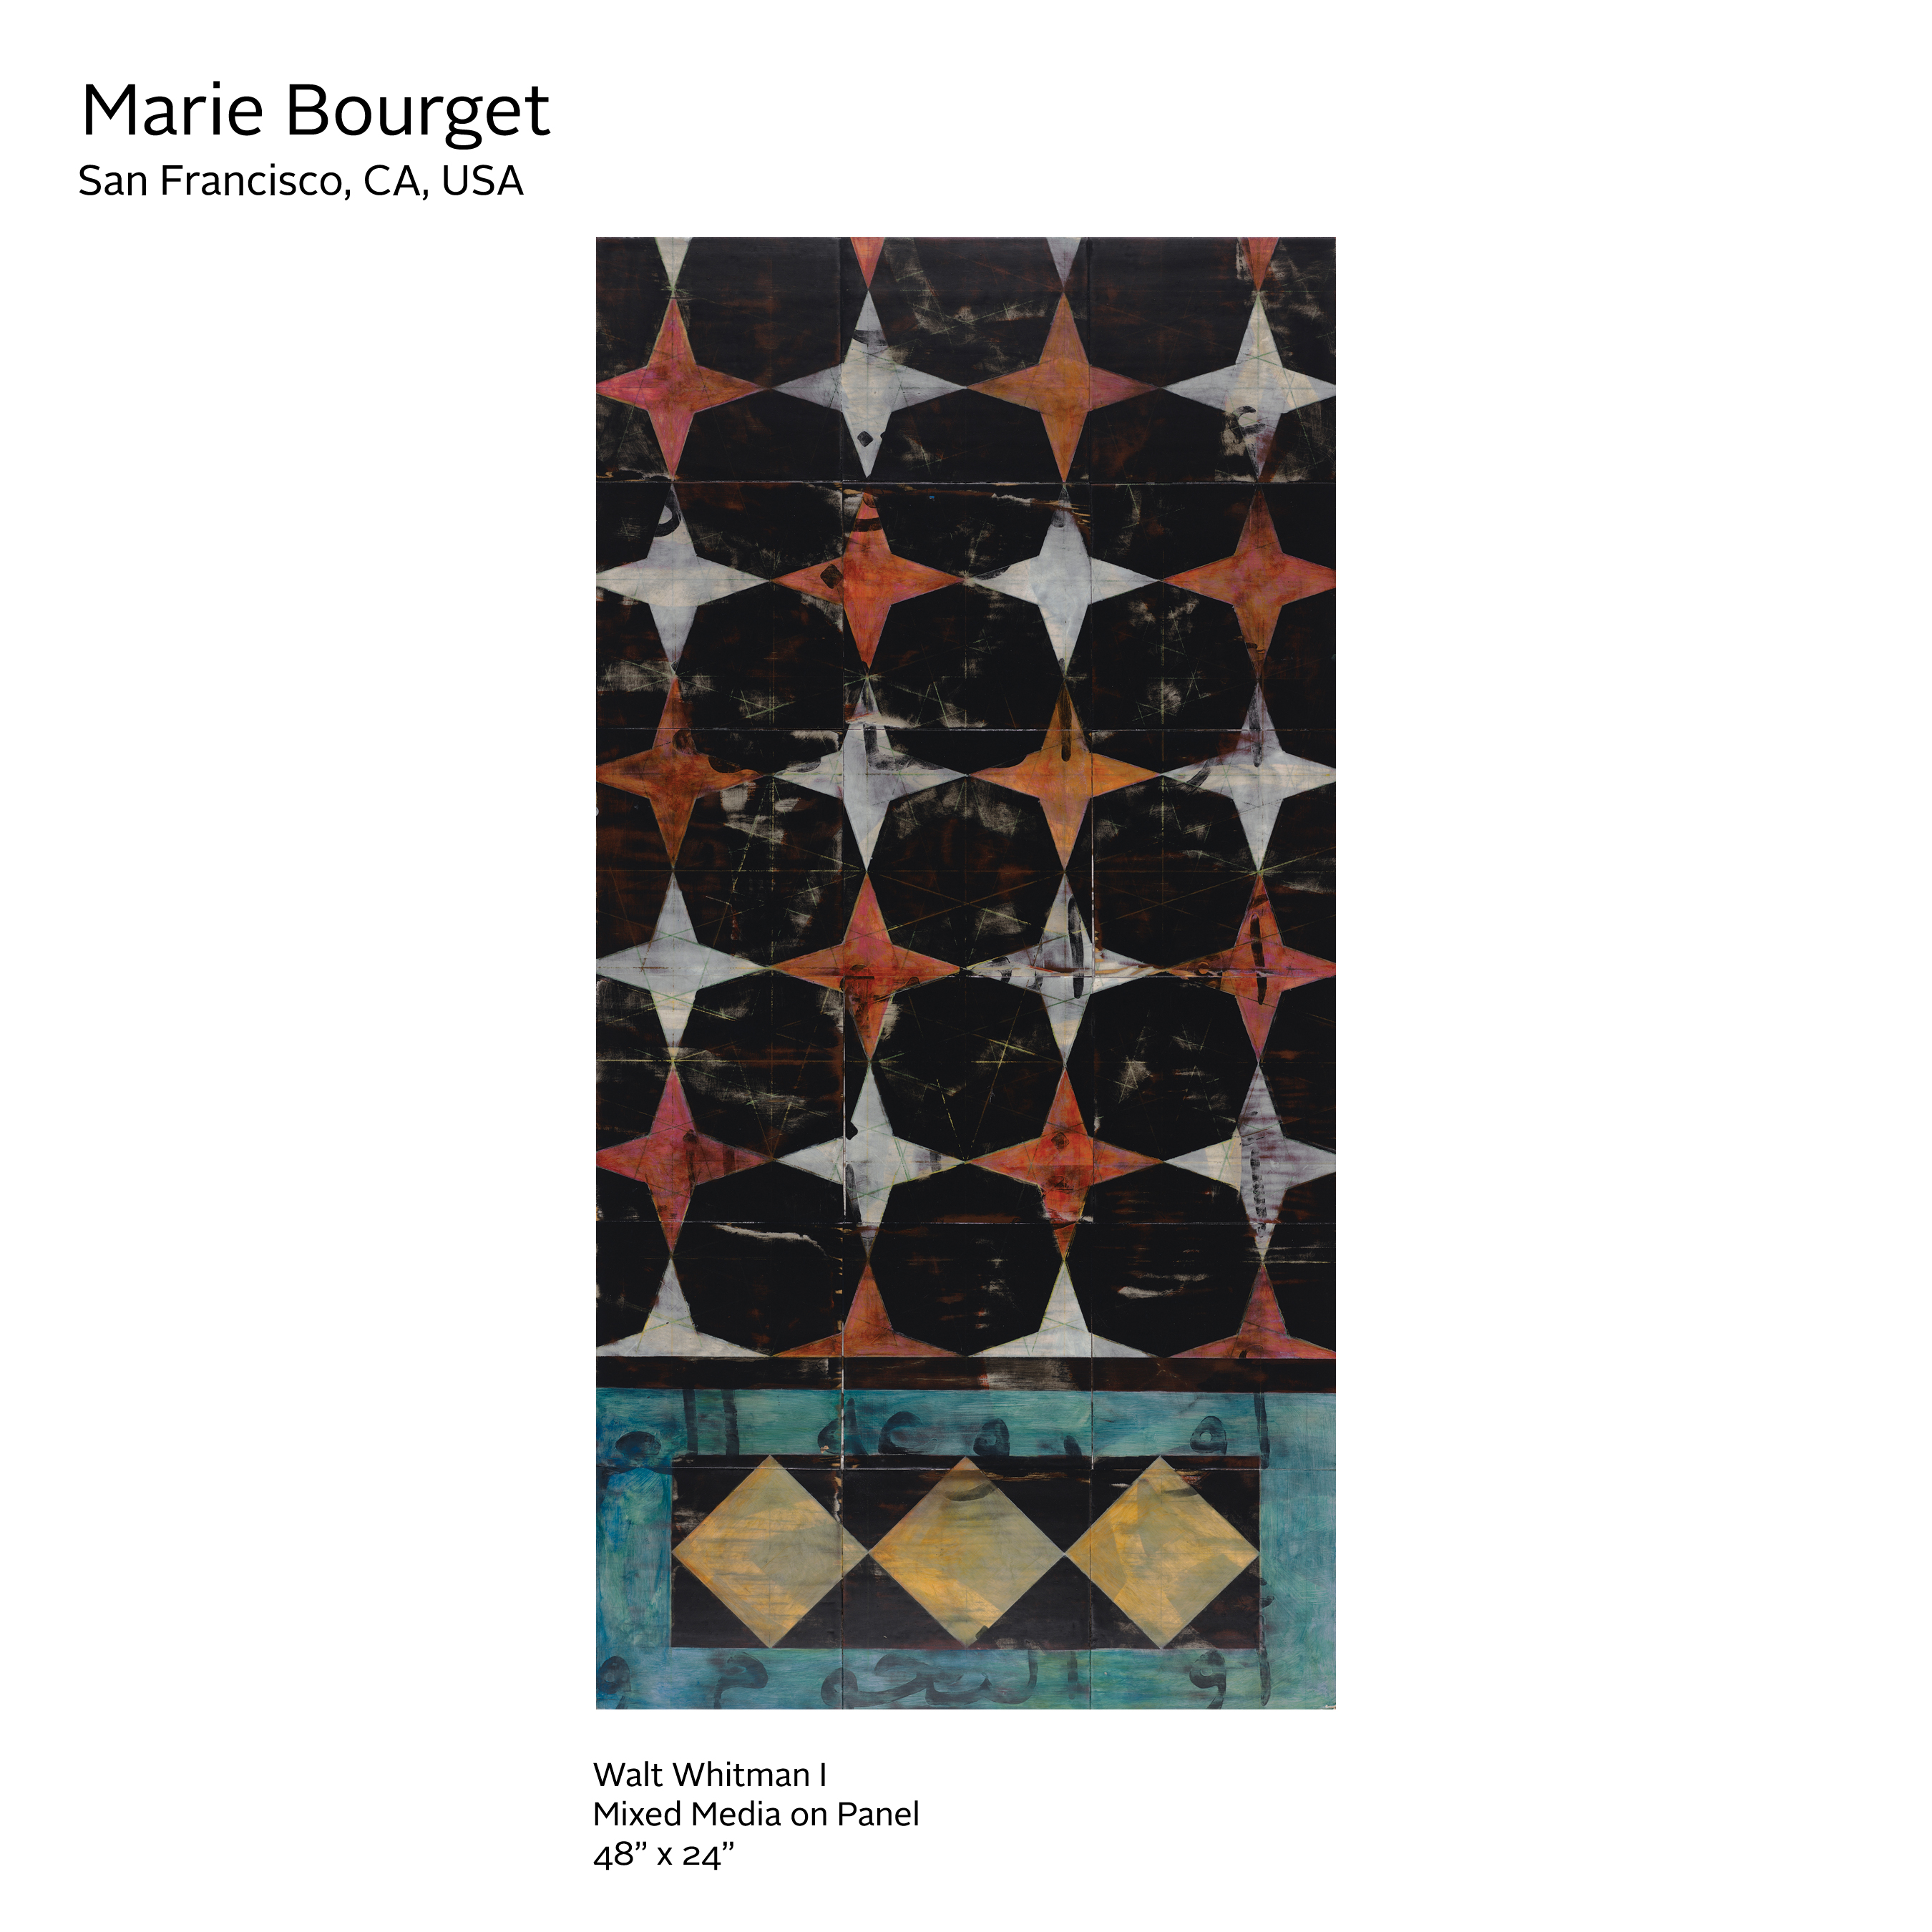 Marie Bourget